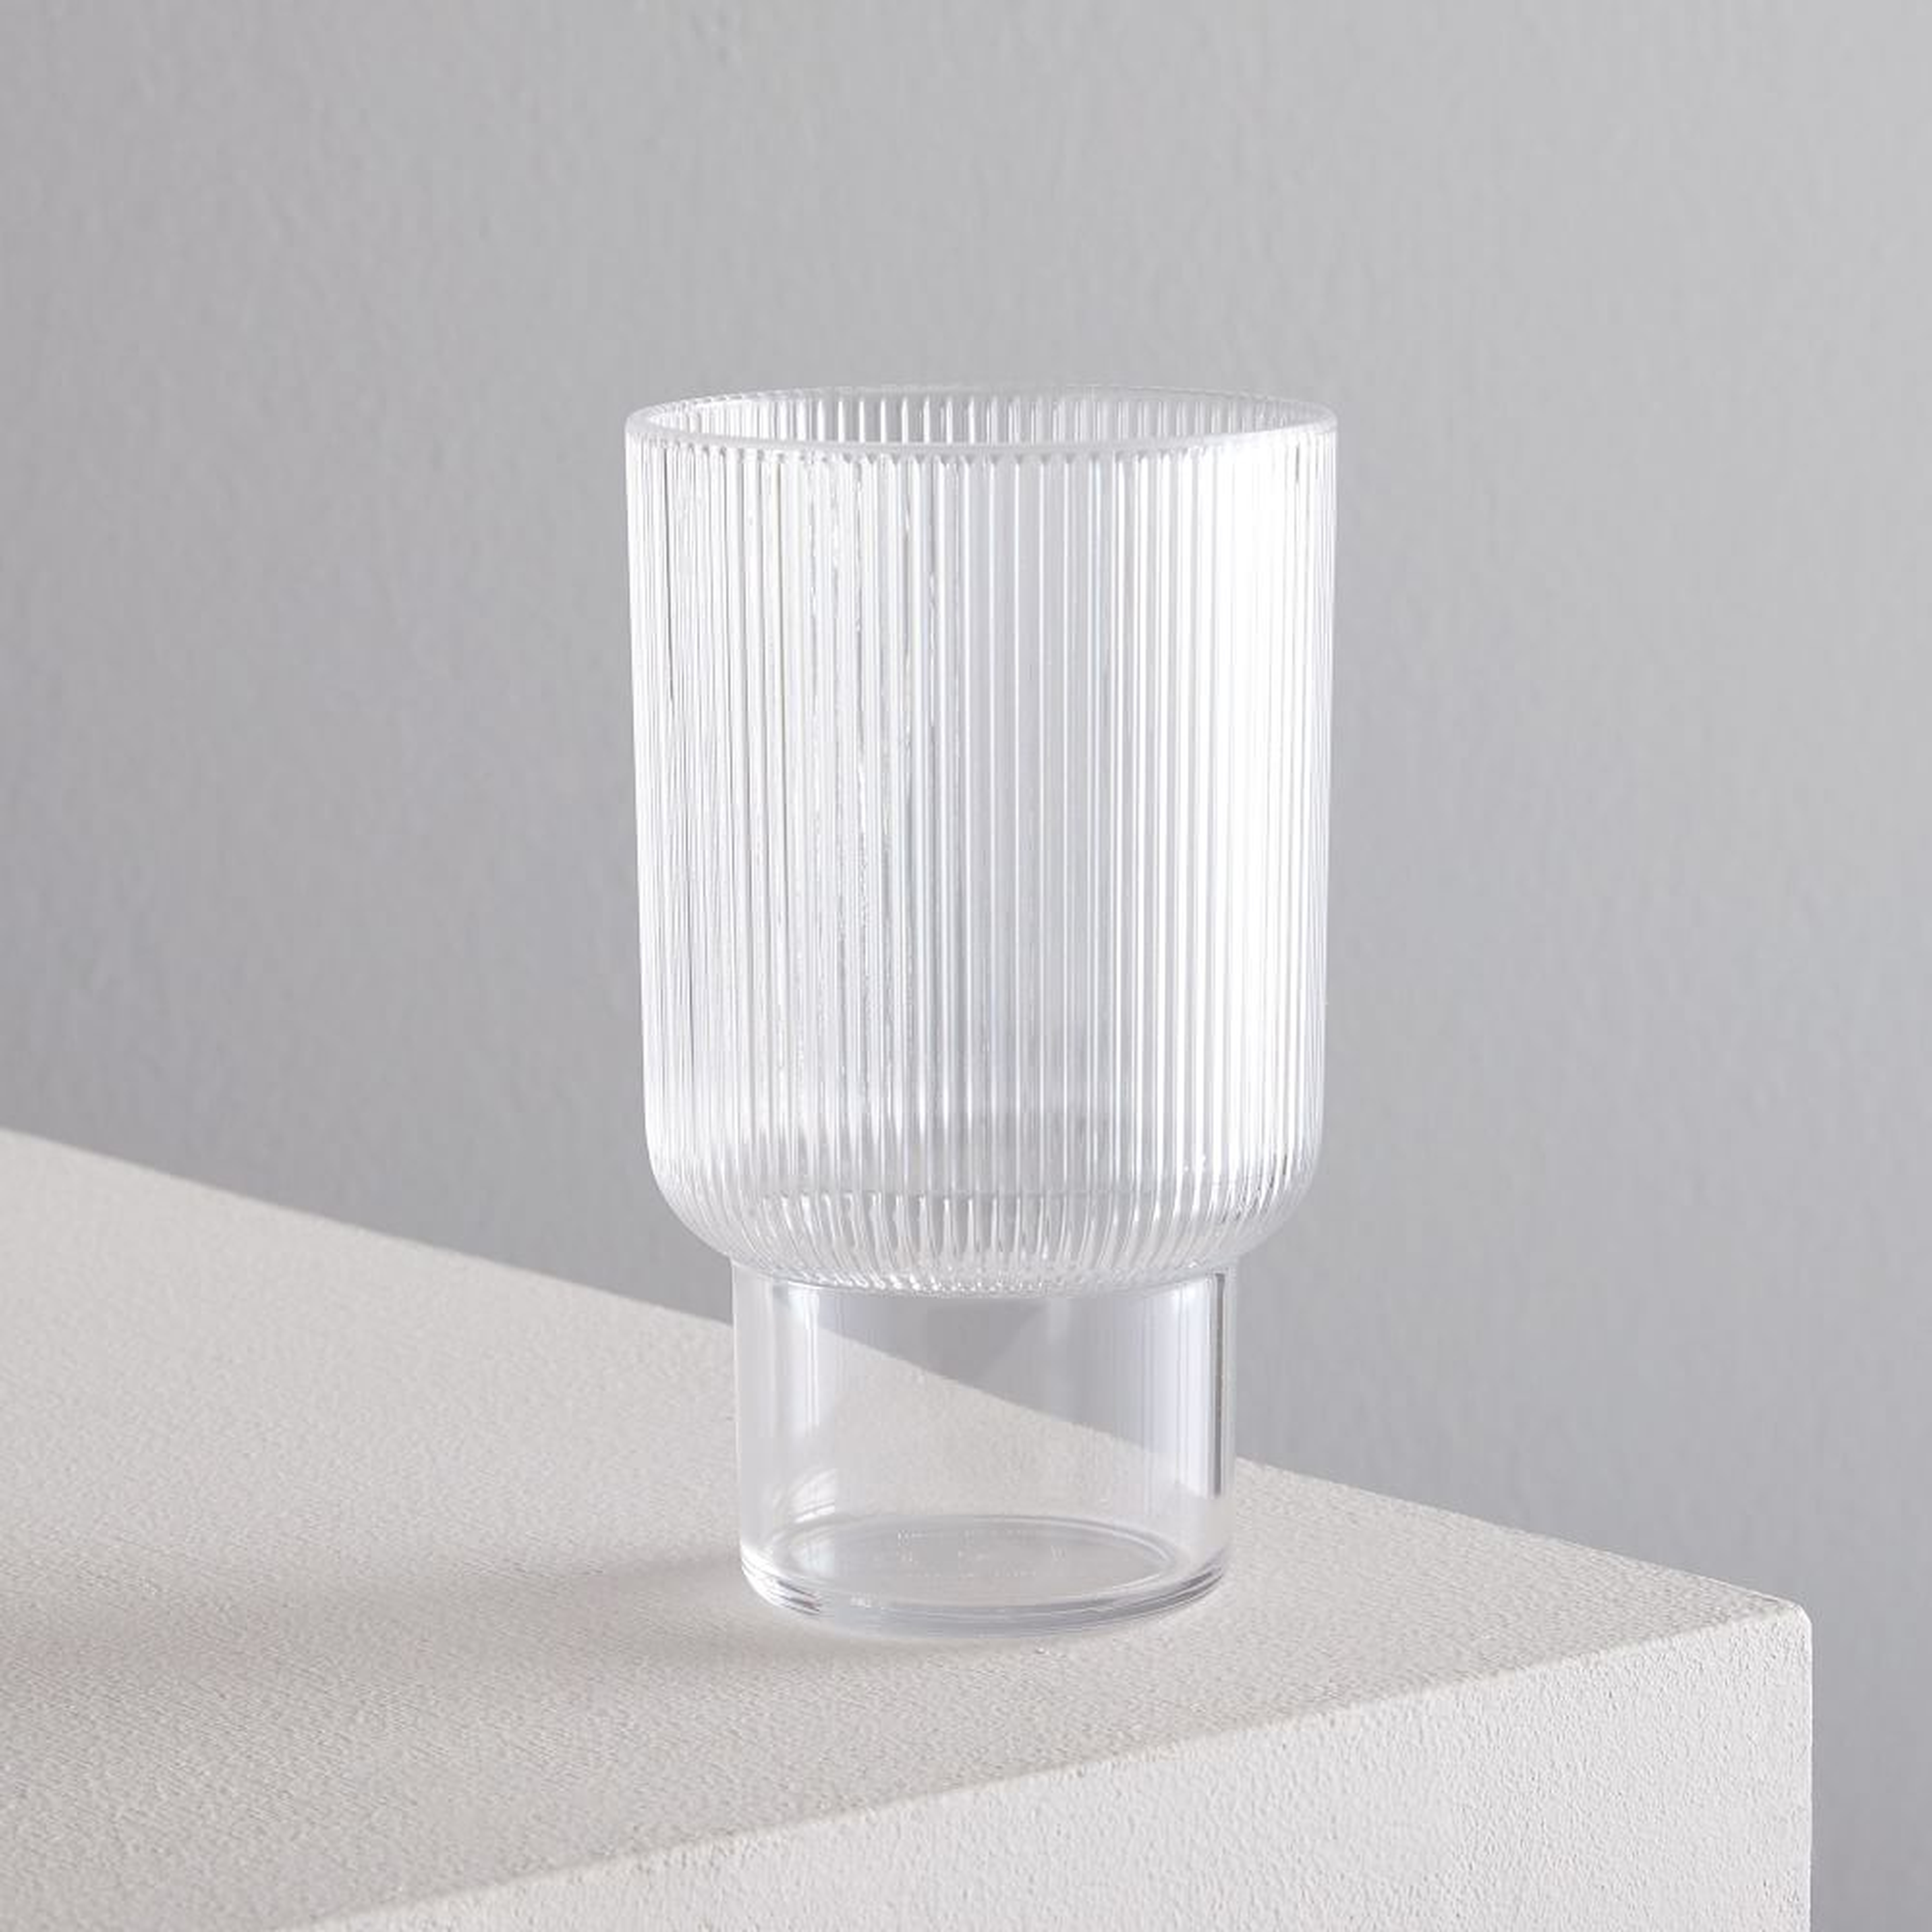 Aaron Probyn Fluted Acrylic Drinking Glass, Tall, 15oz, Clear, Set of 4 - West Elm